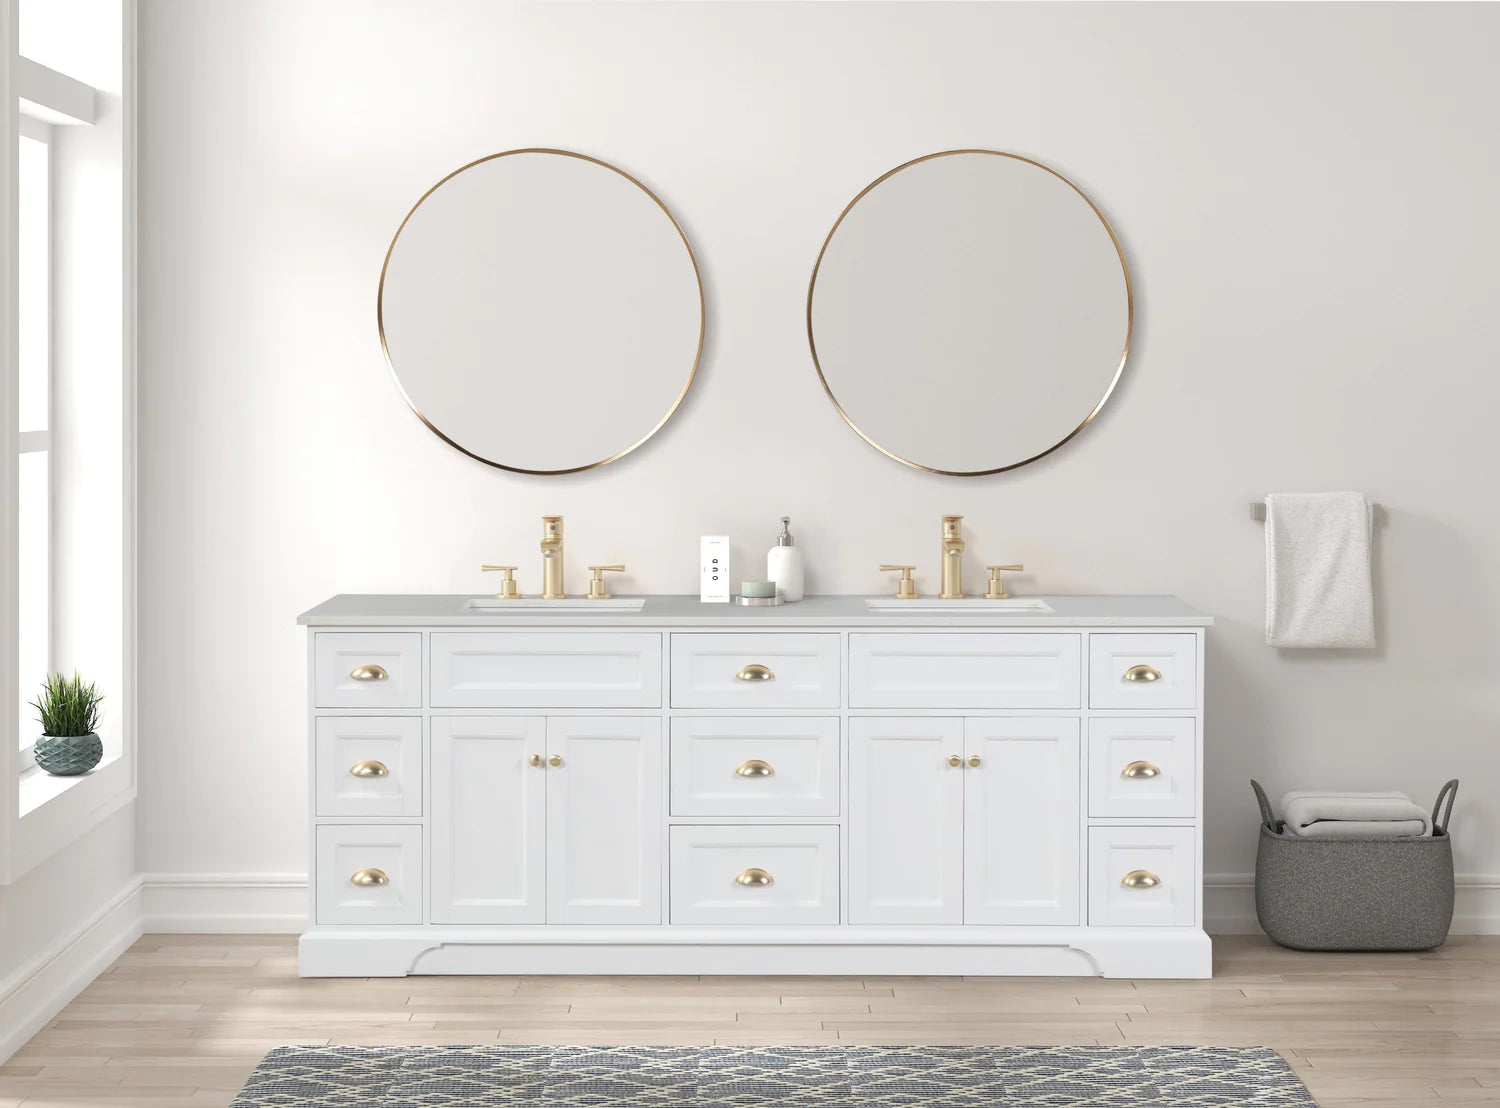 Eviva Epic Double Vanity with White Quartz Top and Gold Hardware - 84" and 96" - Bathroom Design Center